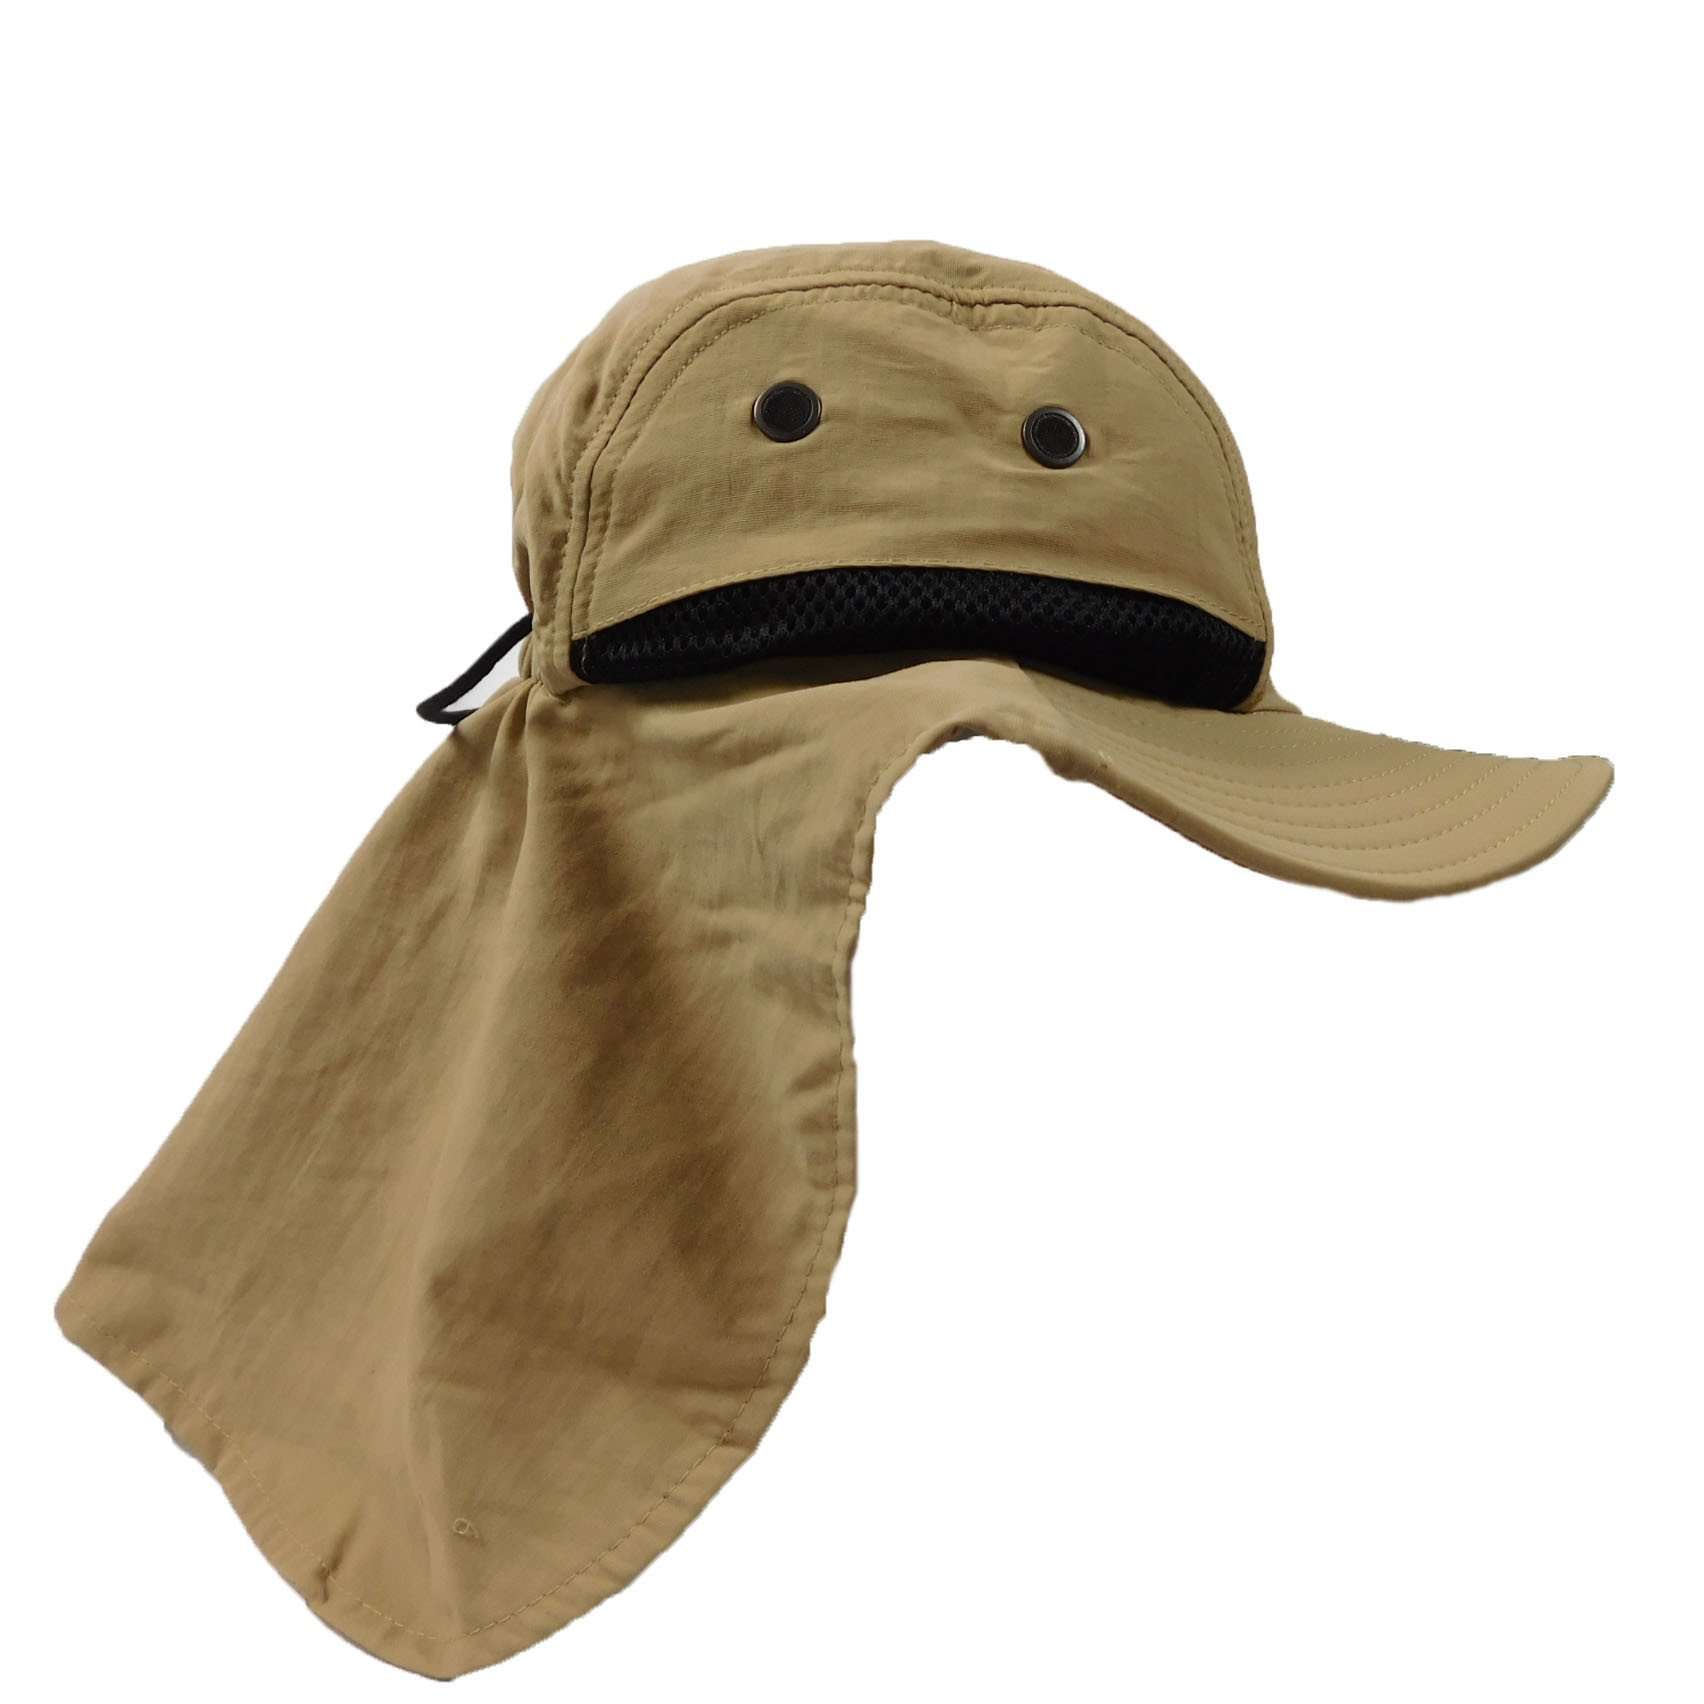 Large Bill Flap Cap for Fishing or Hiking - Neck Cape for Extra Sun Protection White / Os (56-60 cm)